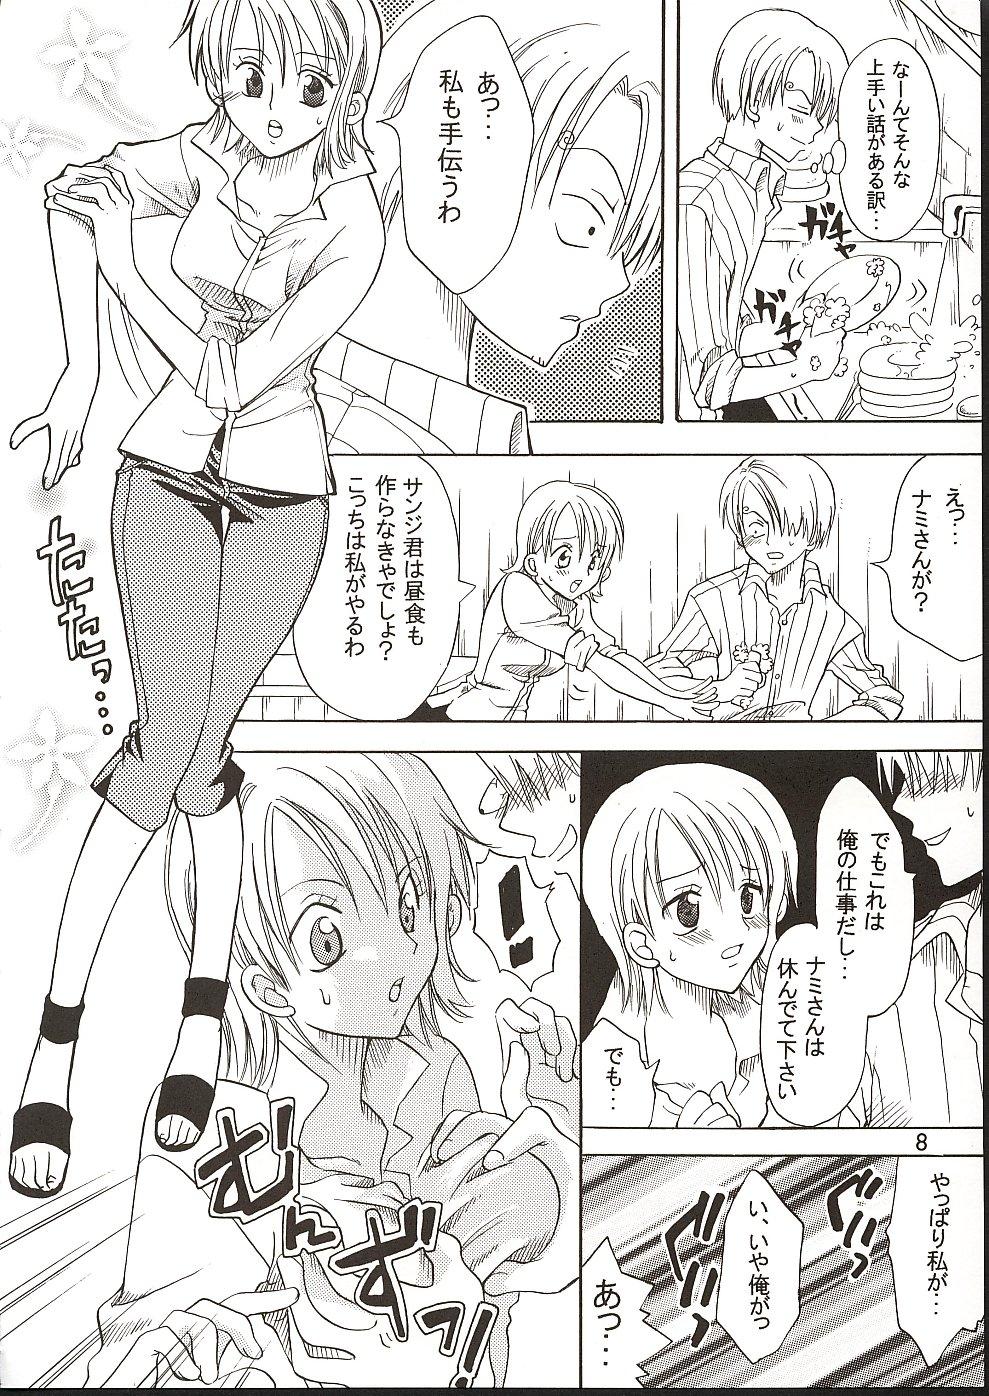 Teenfuns Shiawase Punch! 3 - One piece Camsex - Page 7